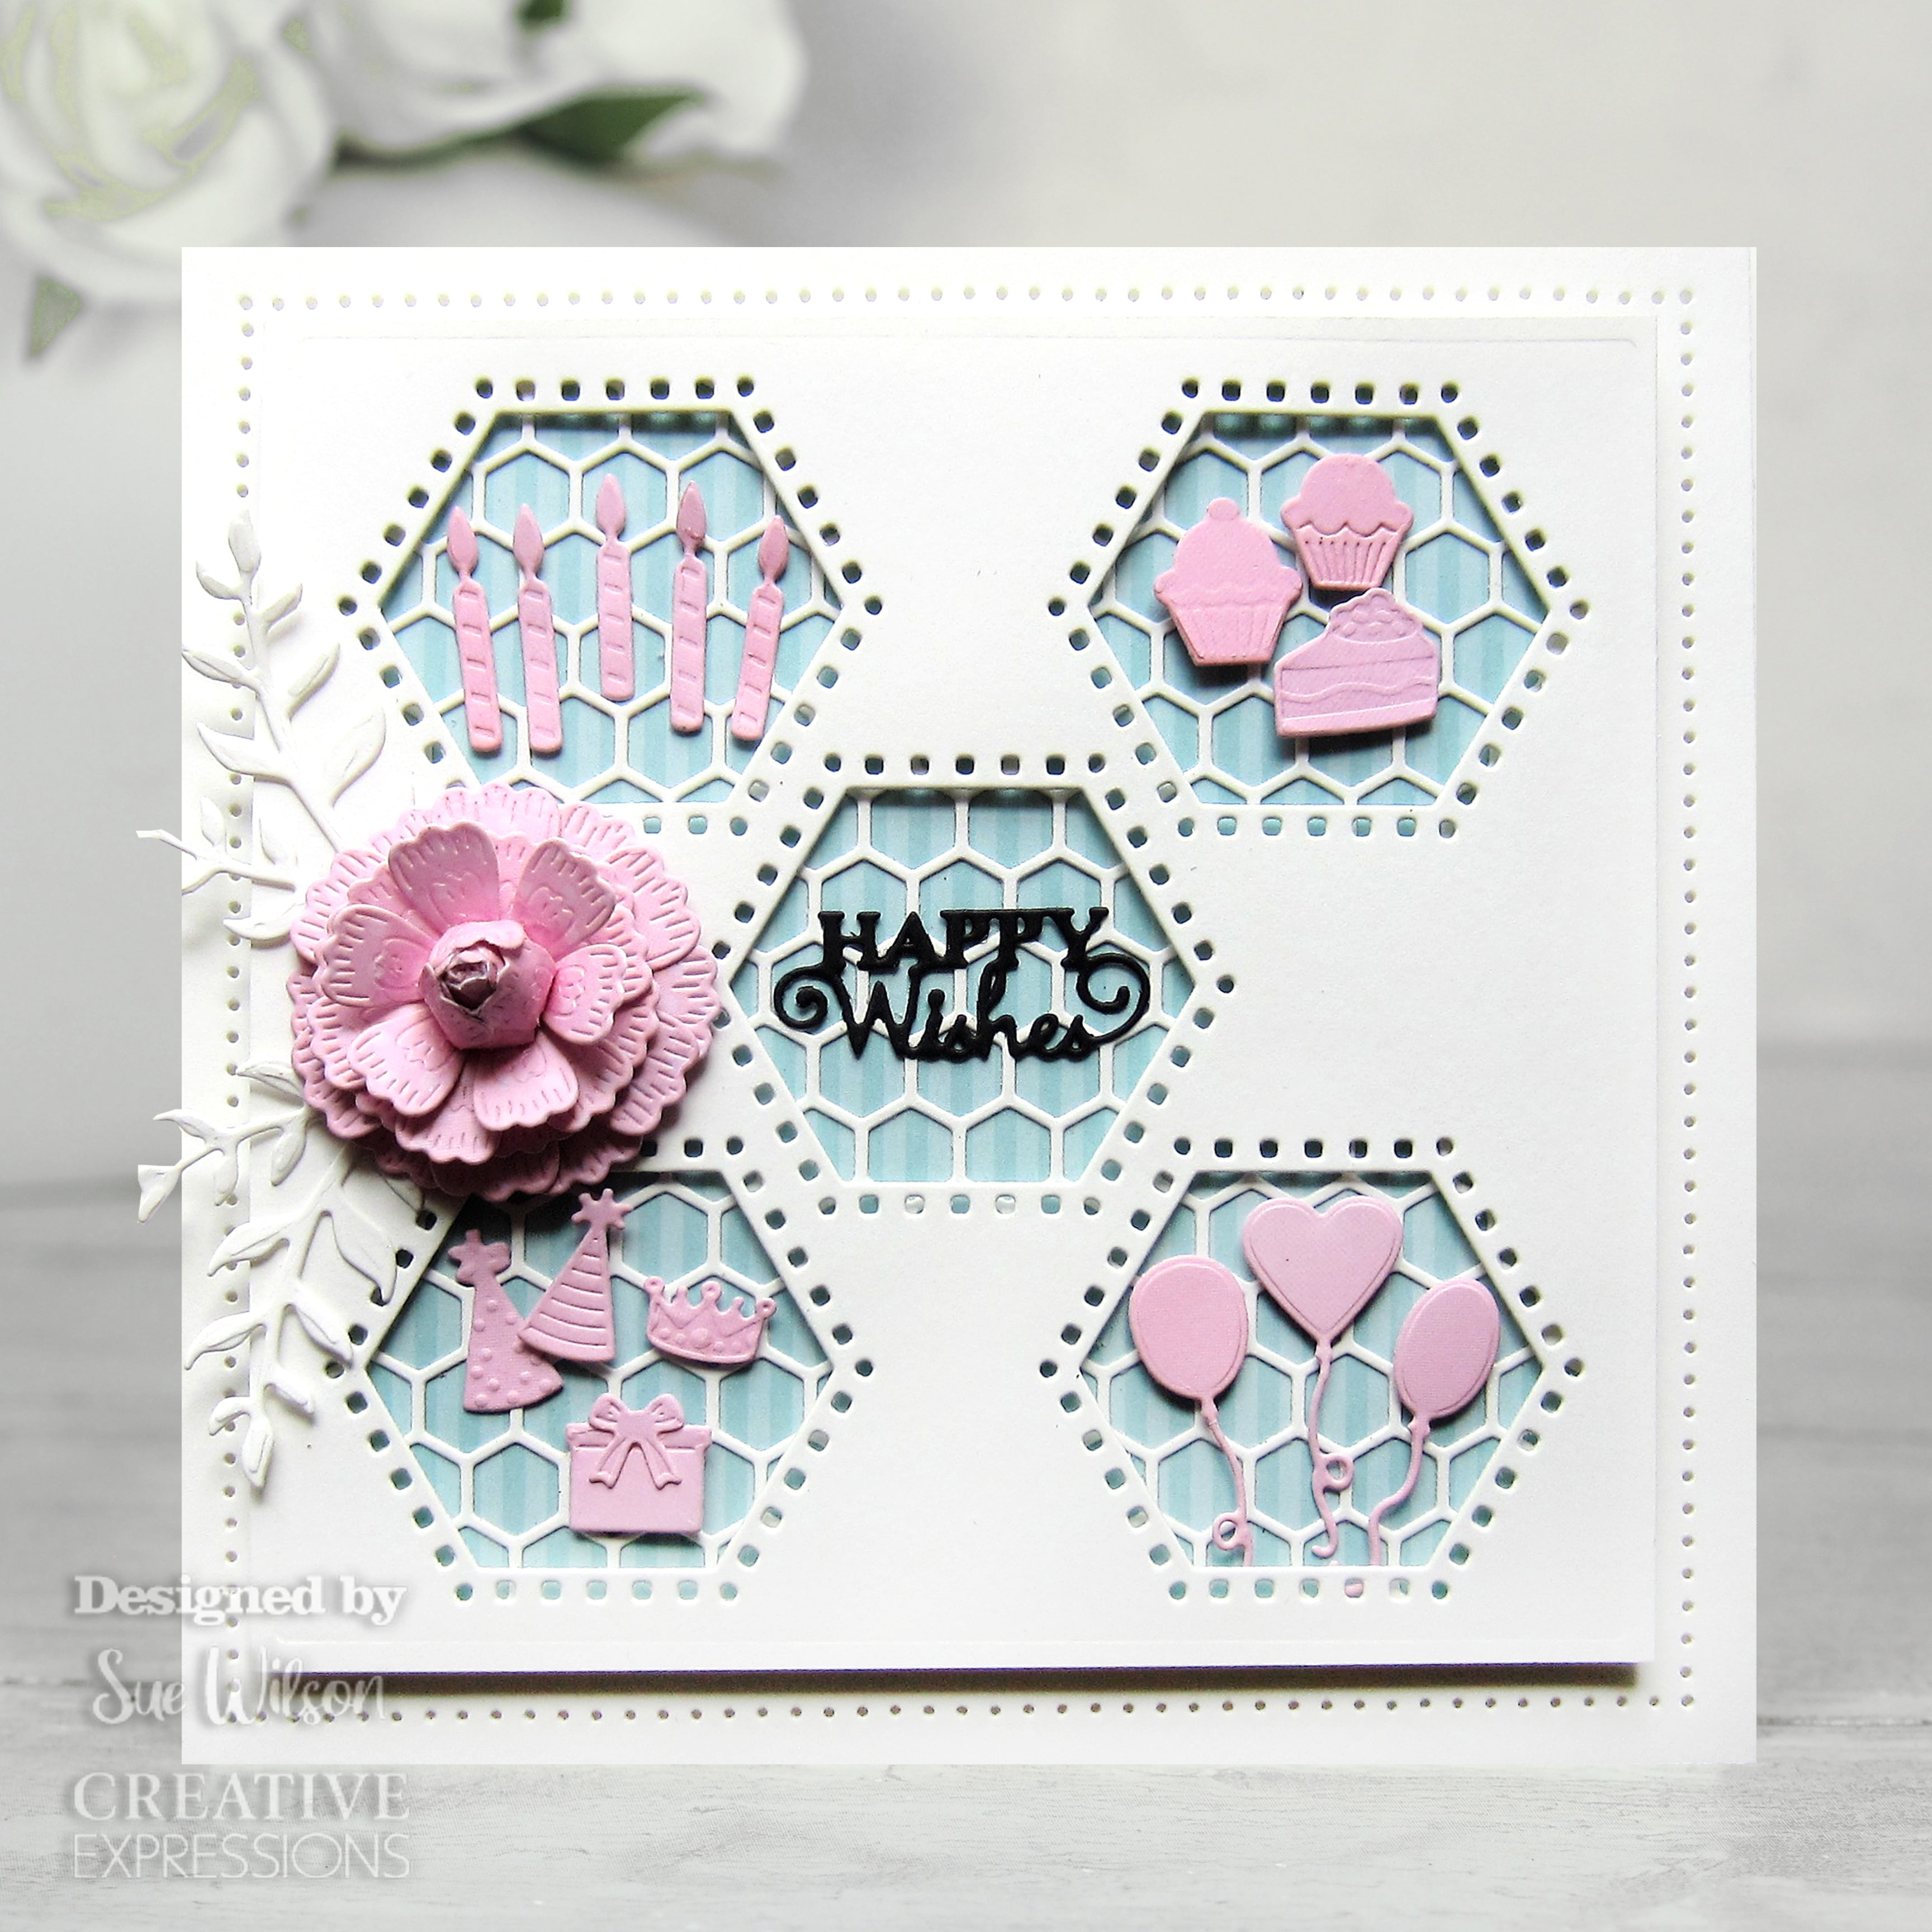 Creative Expressions Sue Wilson Mini Expressions Stacked Happy Wishes Craft Die